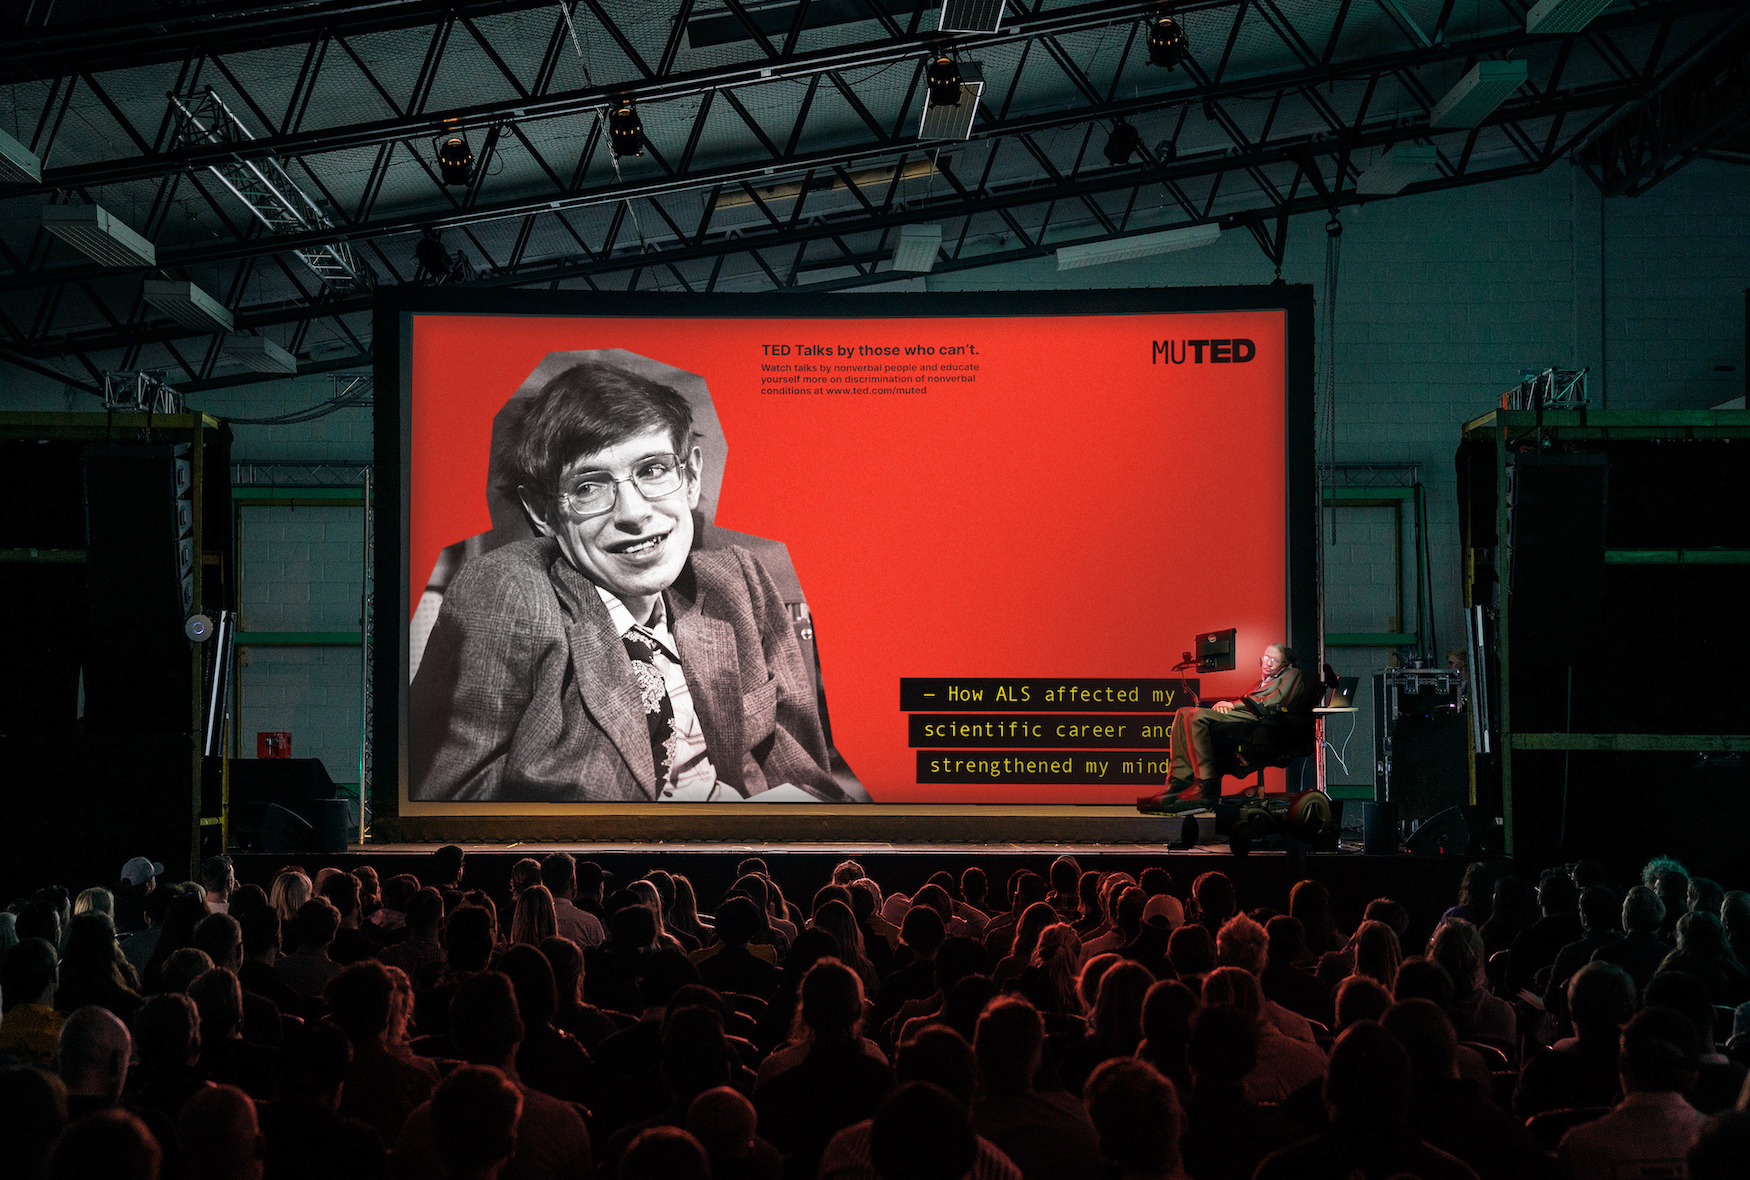 Stephen Hawking is on stage in front of a large screen, giving a talk to an audience on his non-verbal conditions.